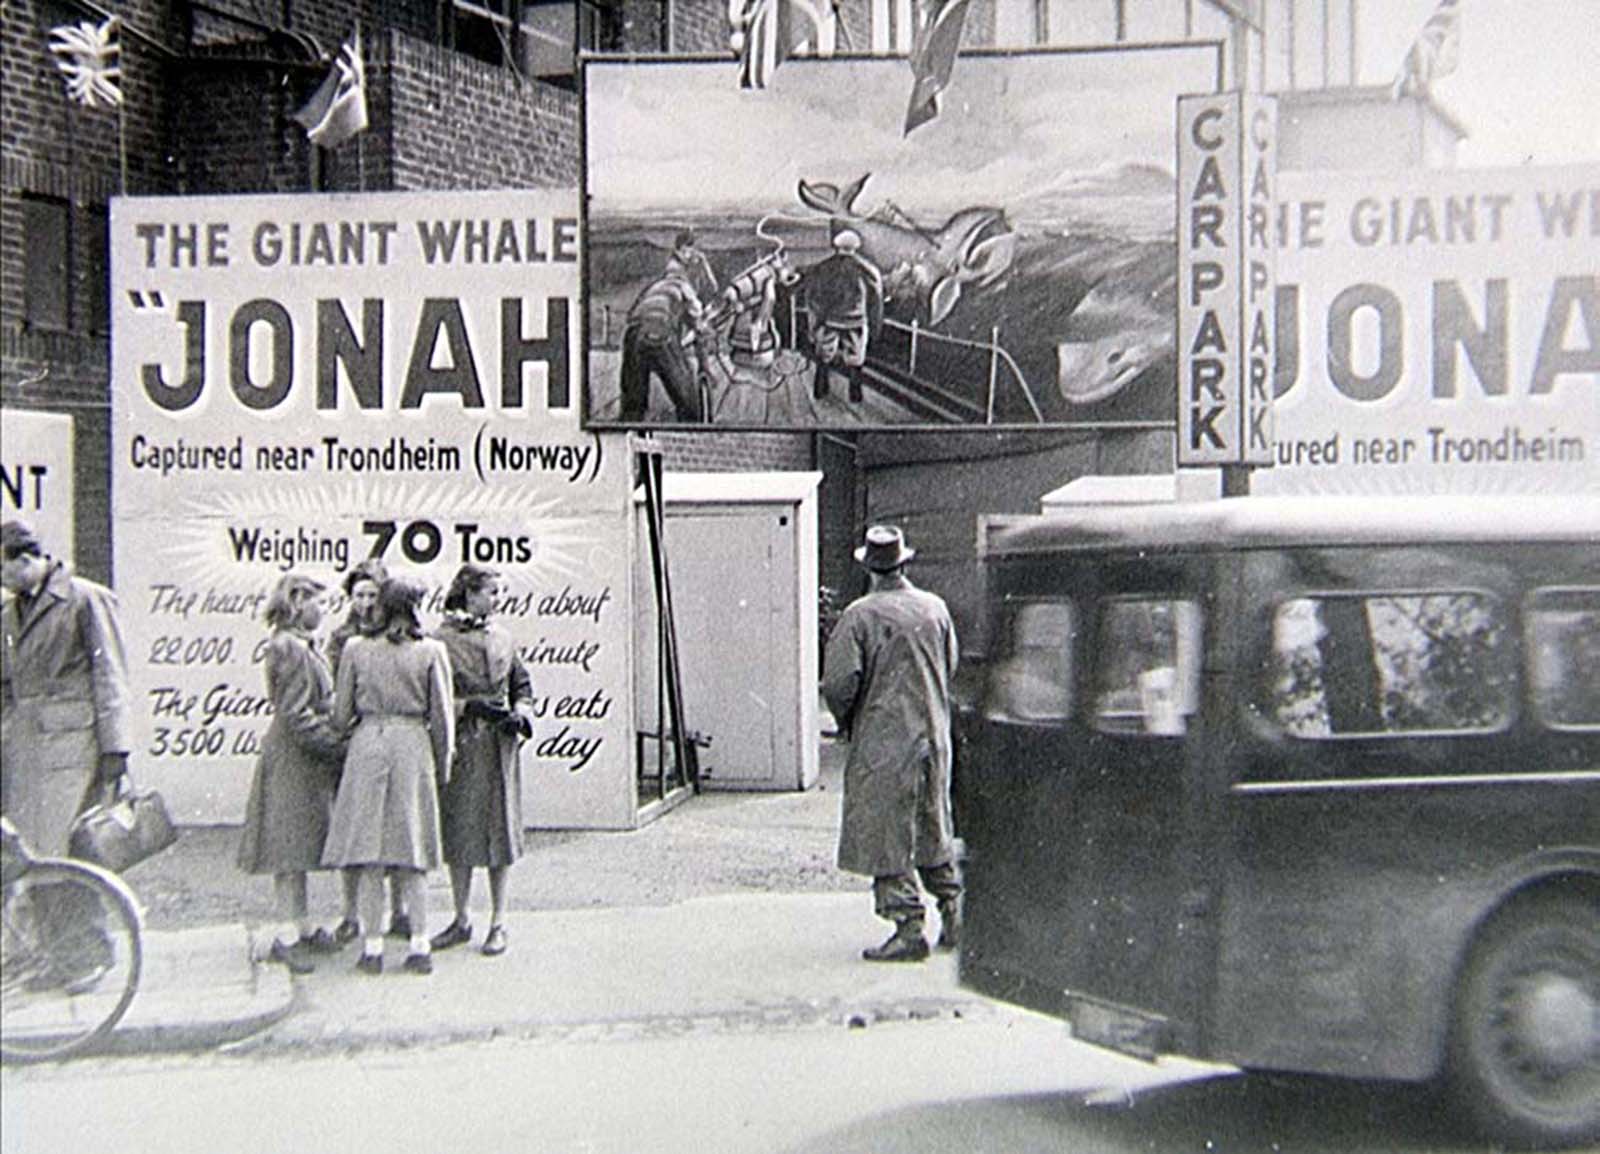 The Giant Whale Jonah”. 1950s.